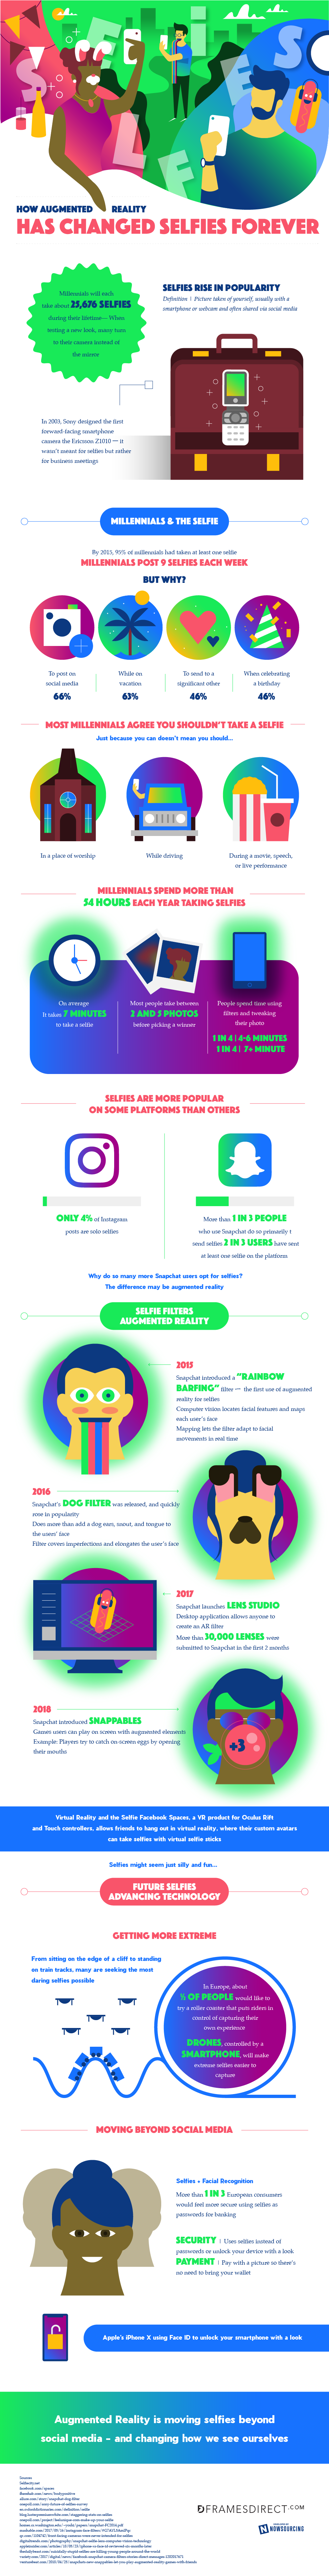 Selfies and Augmented Reality by the Numbers - Infographic